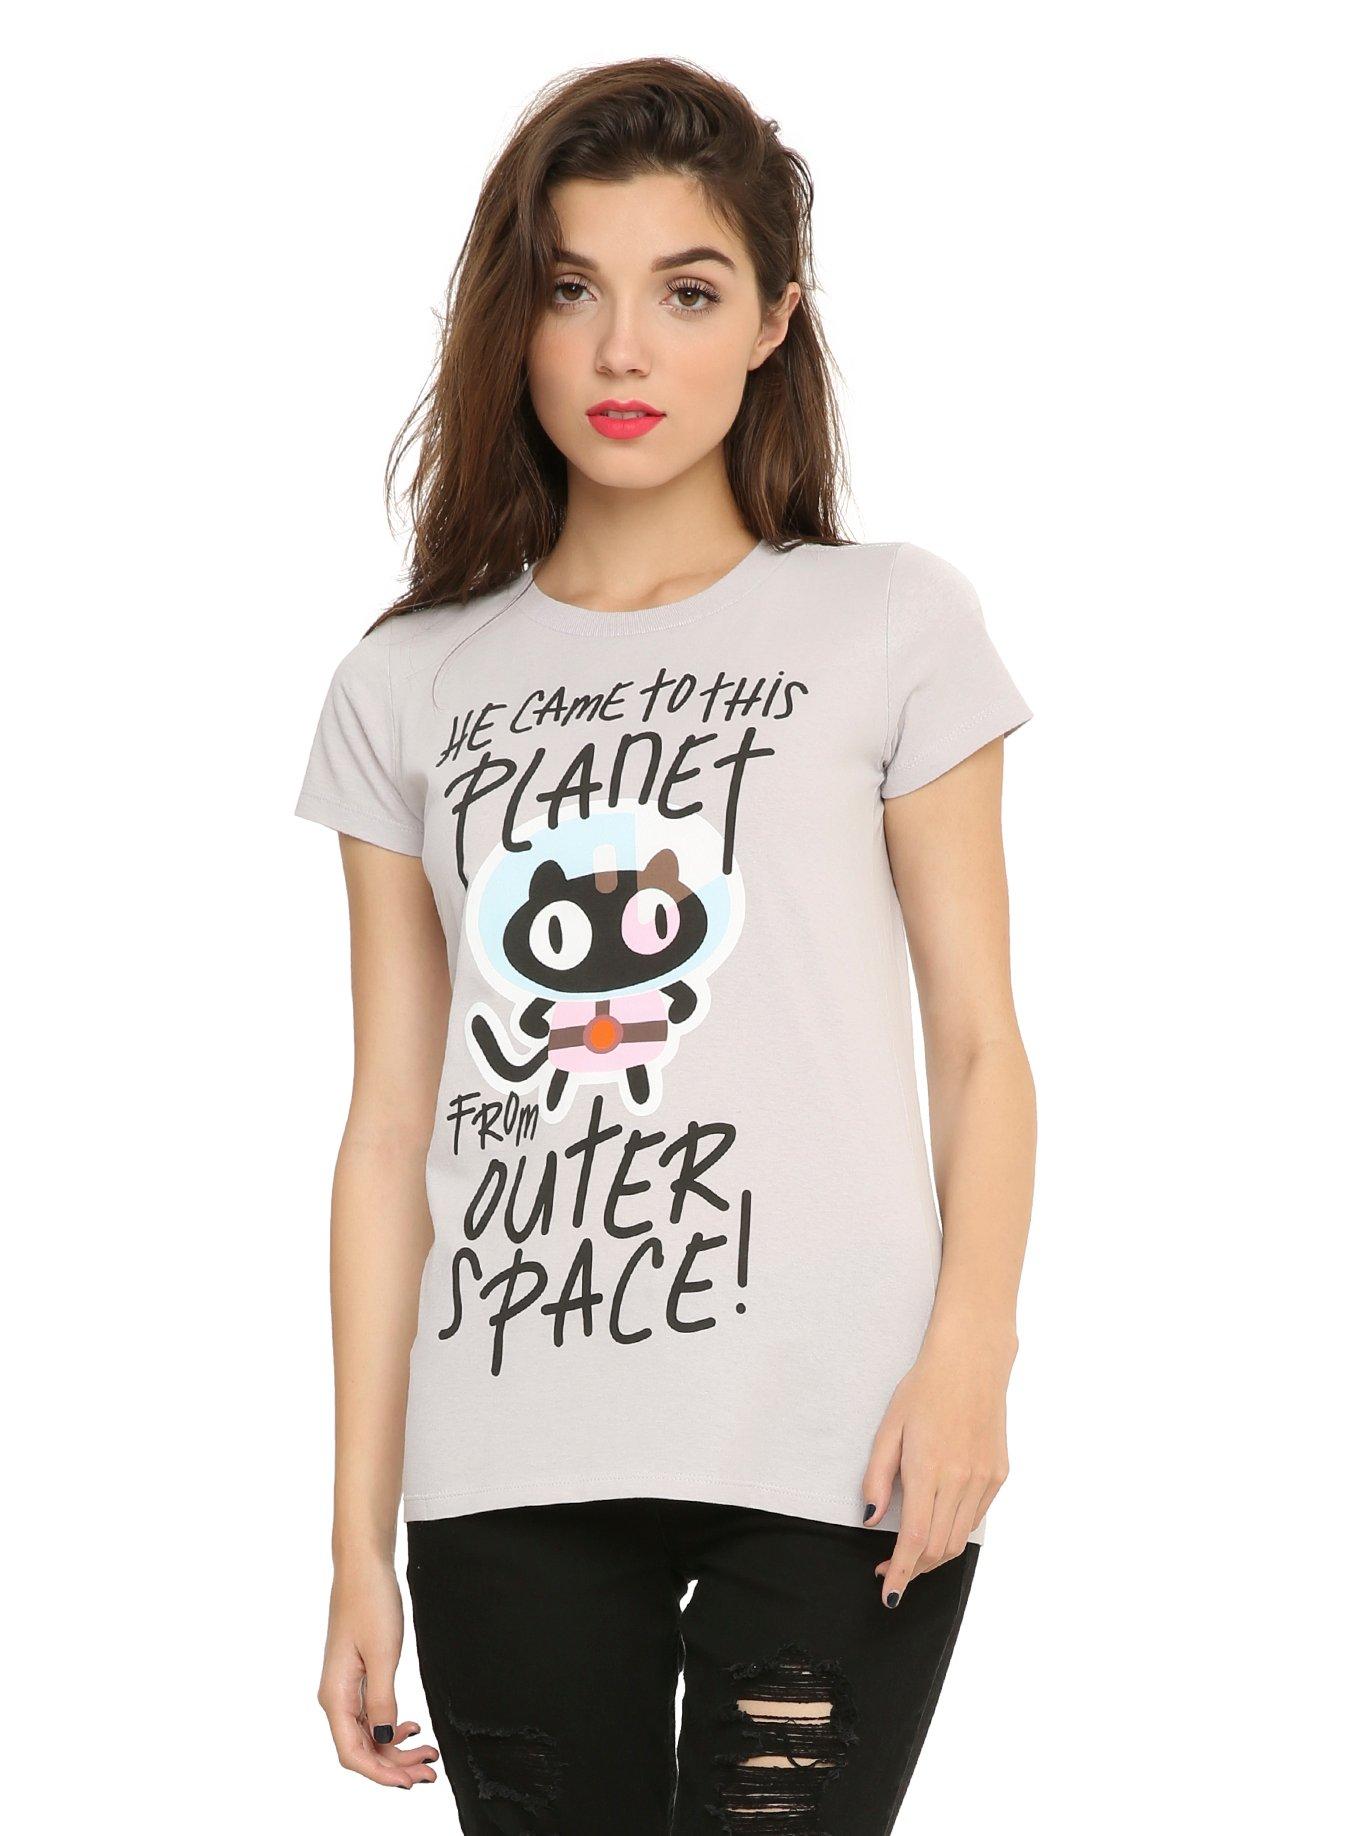 Steven Universe Cookie Cat From Outer Space Girls T-Shirt, WHITE, hi-res